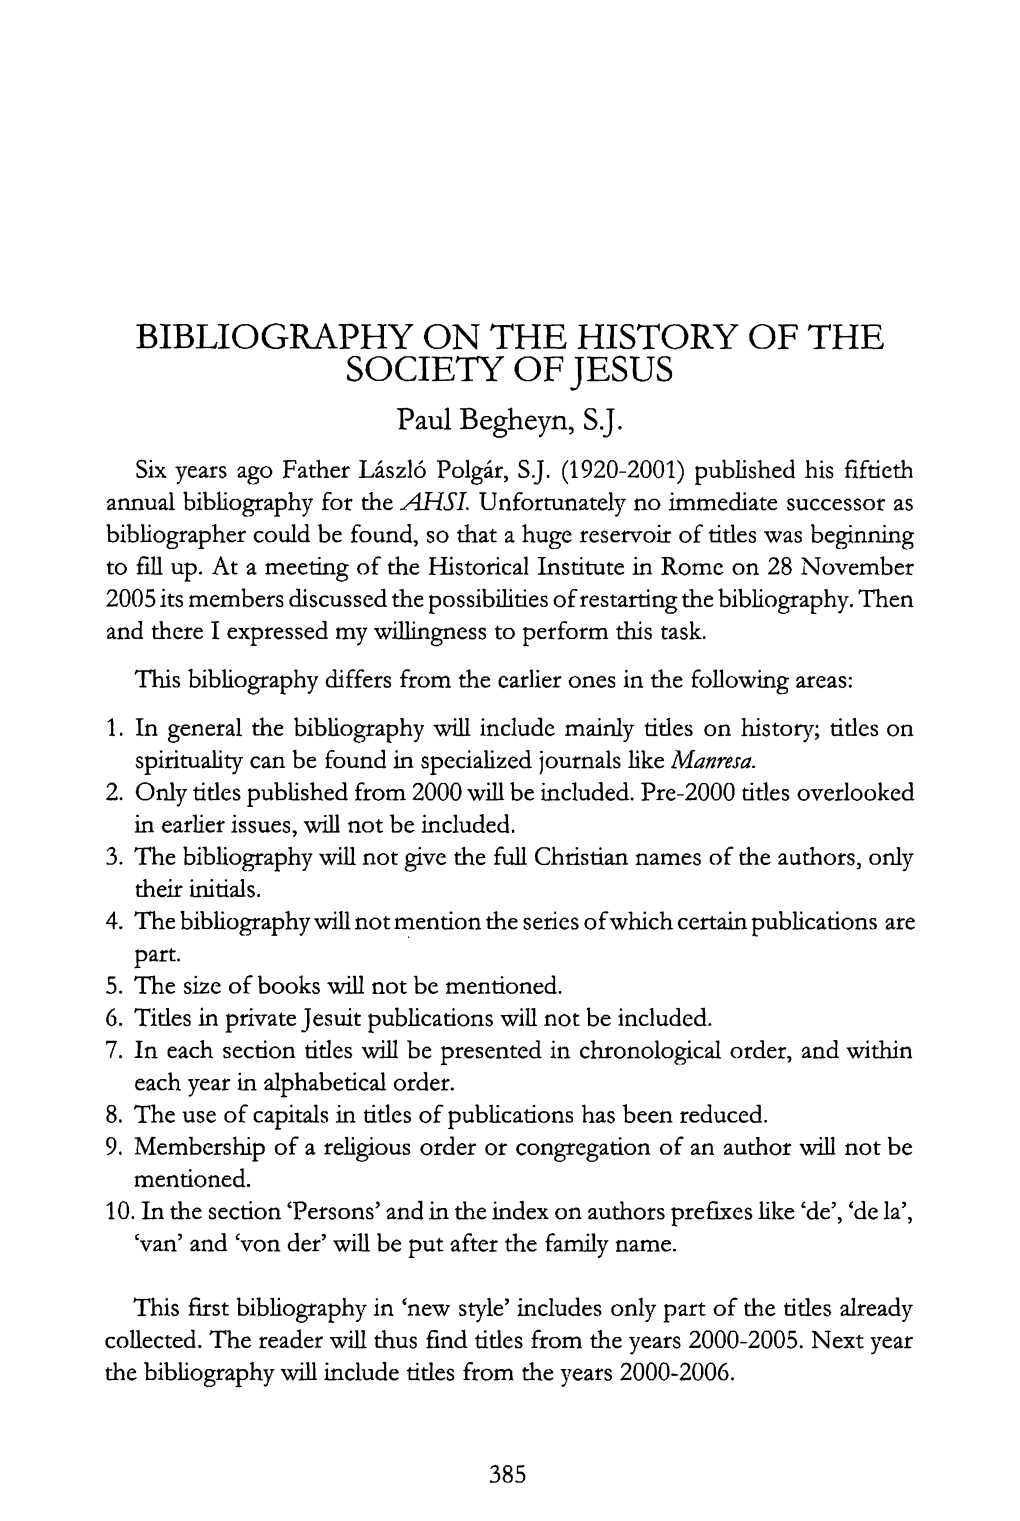 BIBLIOGRAPHY on the HISTORY of the SOCIETY of JESUS Paul Begheyn, S.J